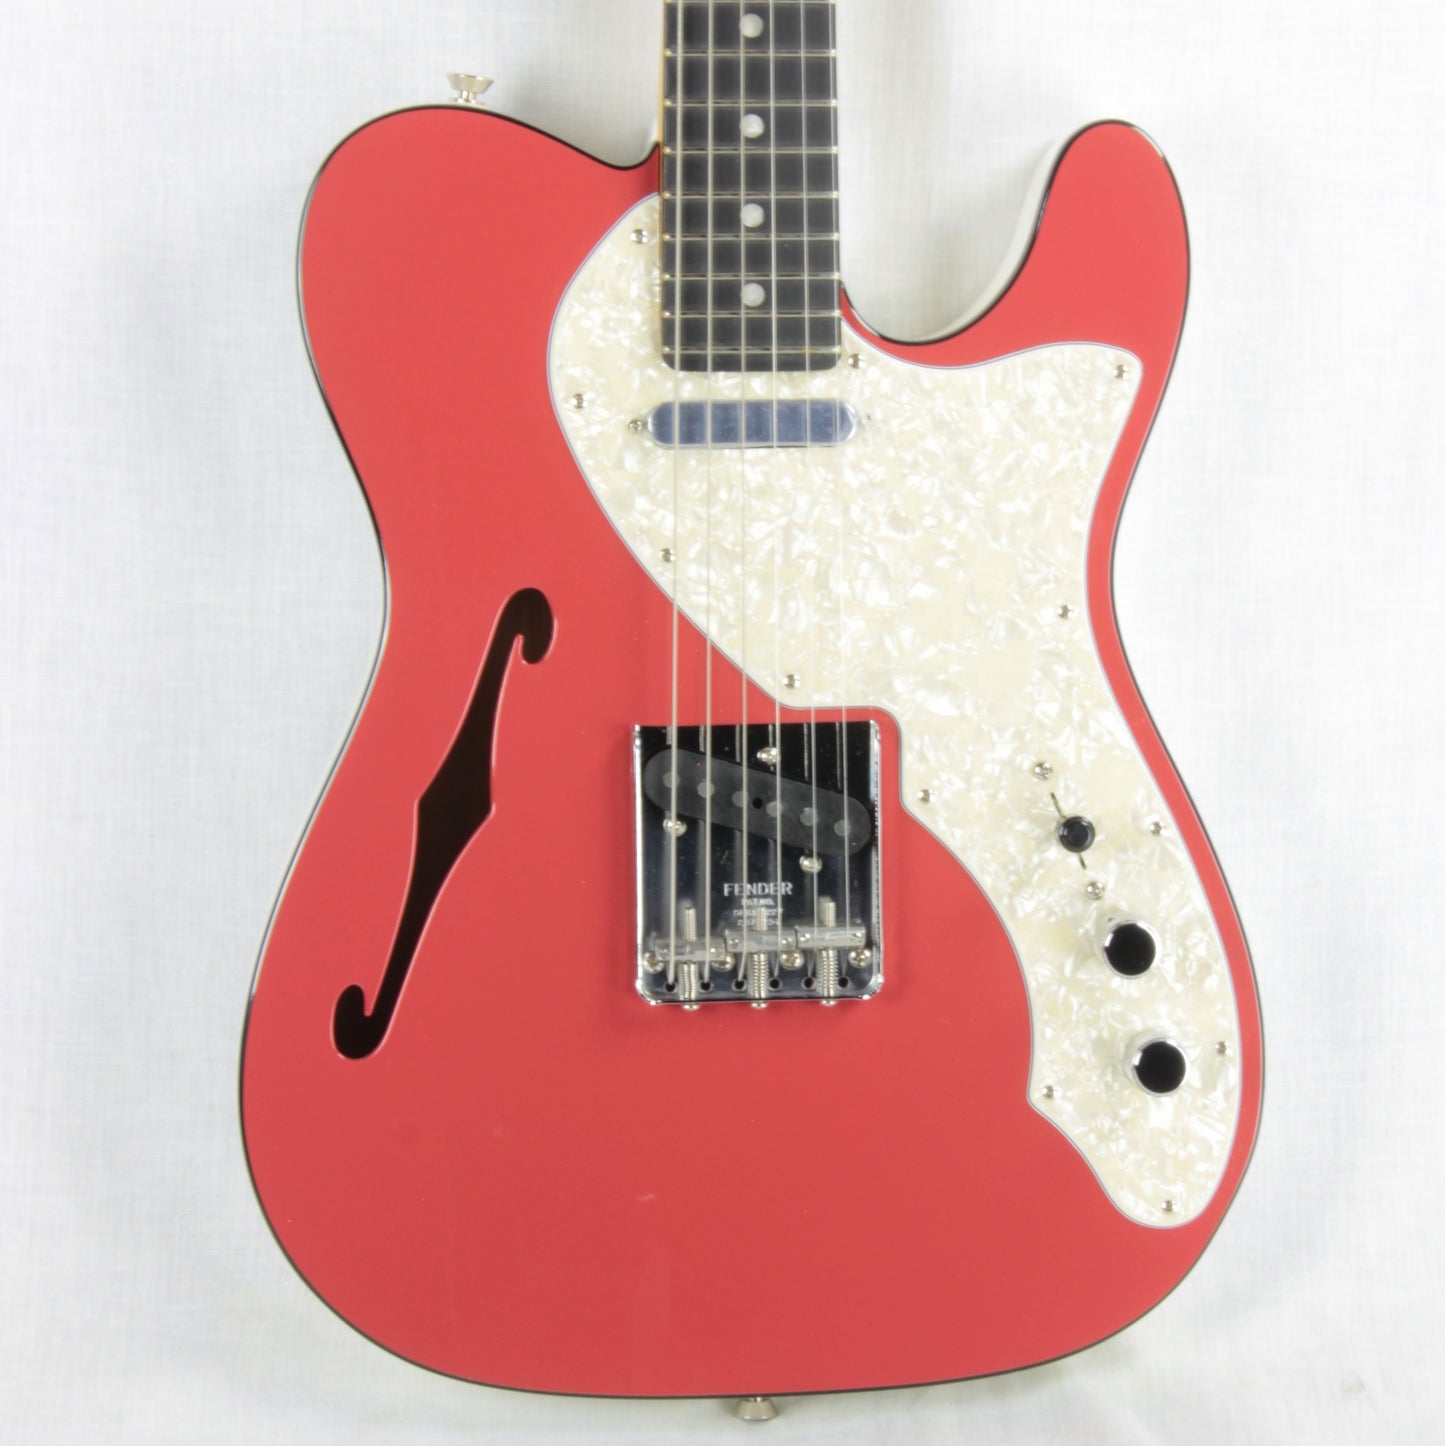 2019 Fender LIMITED EDITION American Telecaster Thinline USA Two-Tone Tele Fiesta Red Custom Shop Nocaster Pups!